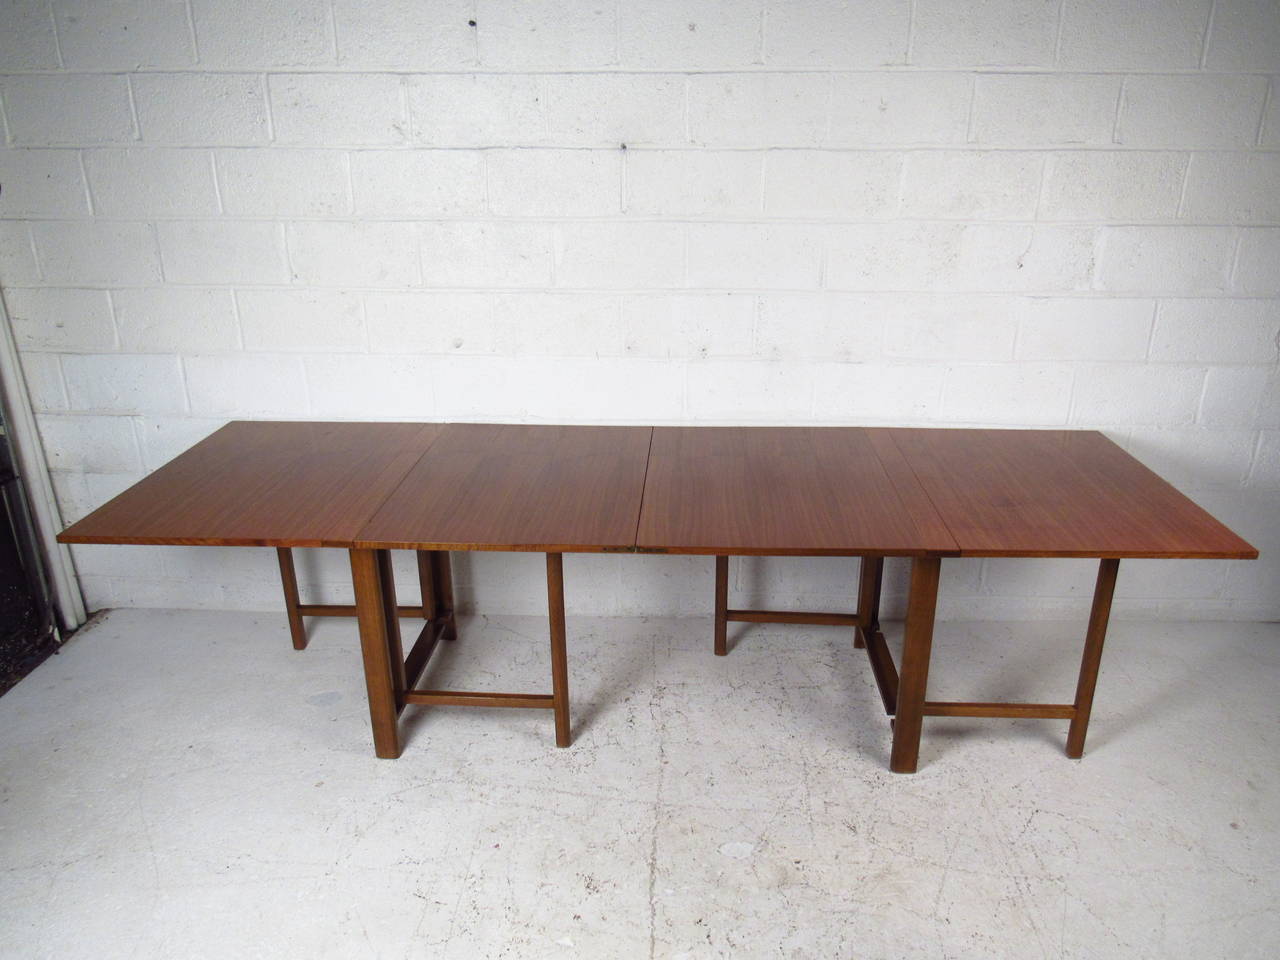 This beautiful Midcentury table opens from 10